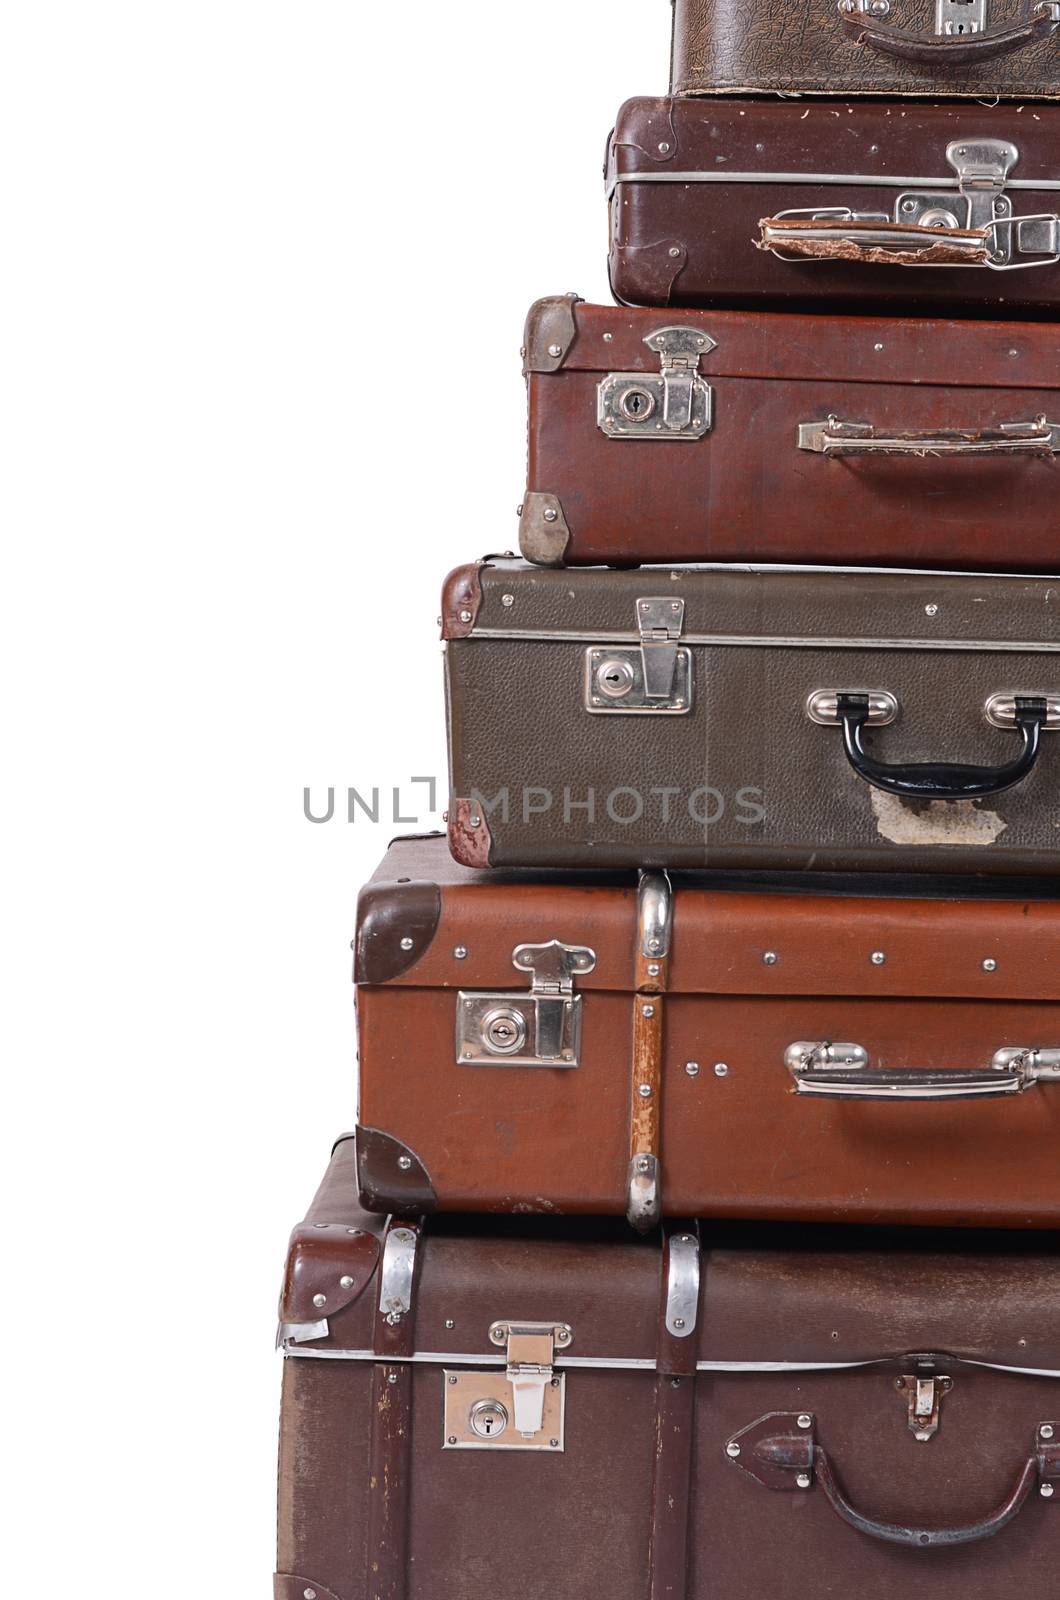 The old suitcase isolated on white background